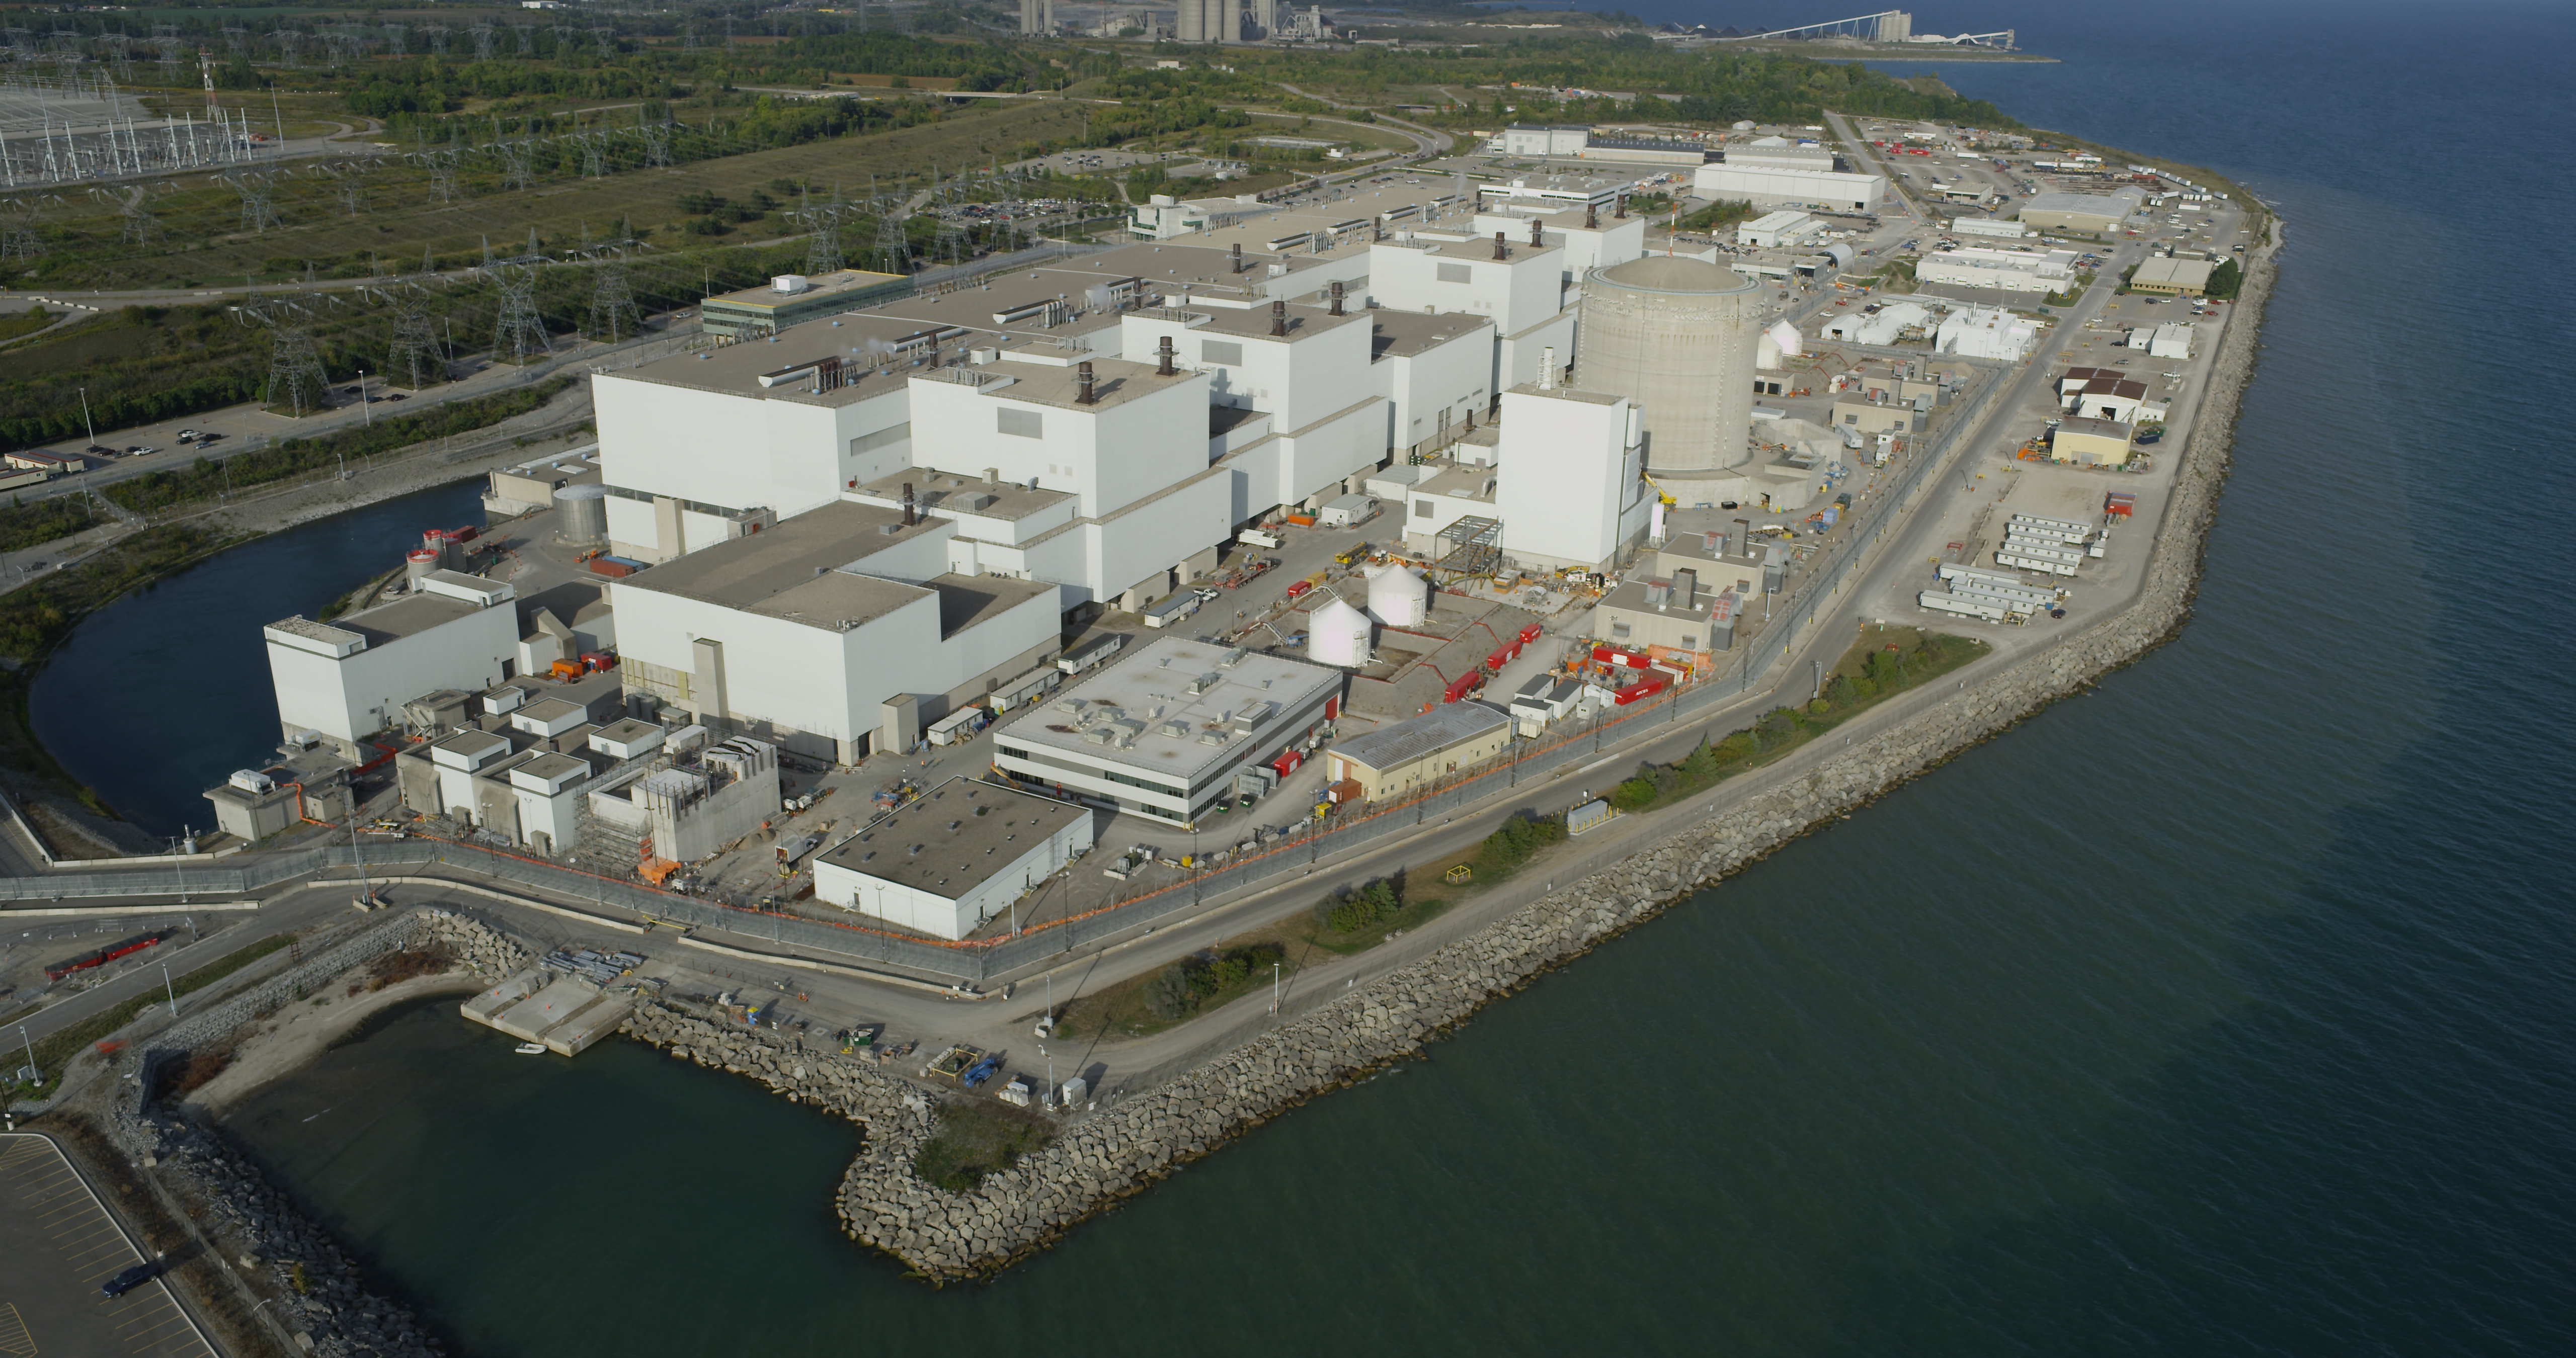 Aerial view of the Darlington facility, near the shore of a large body of water.